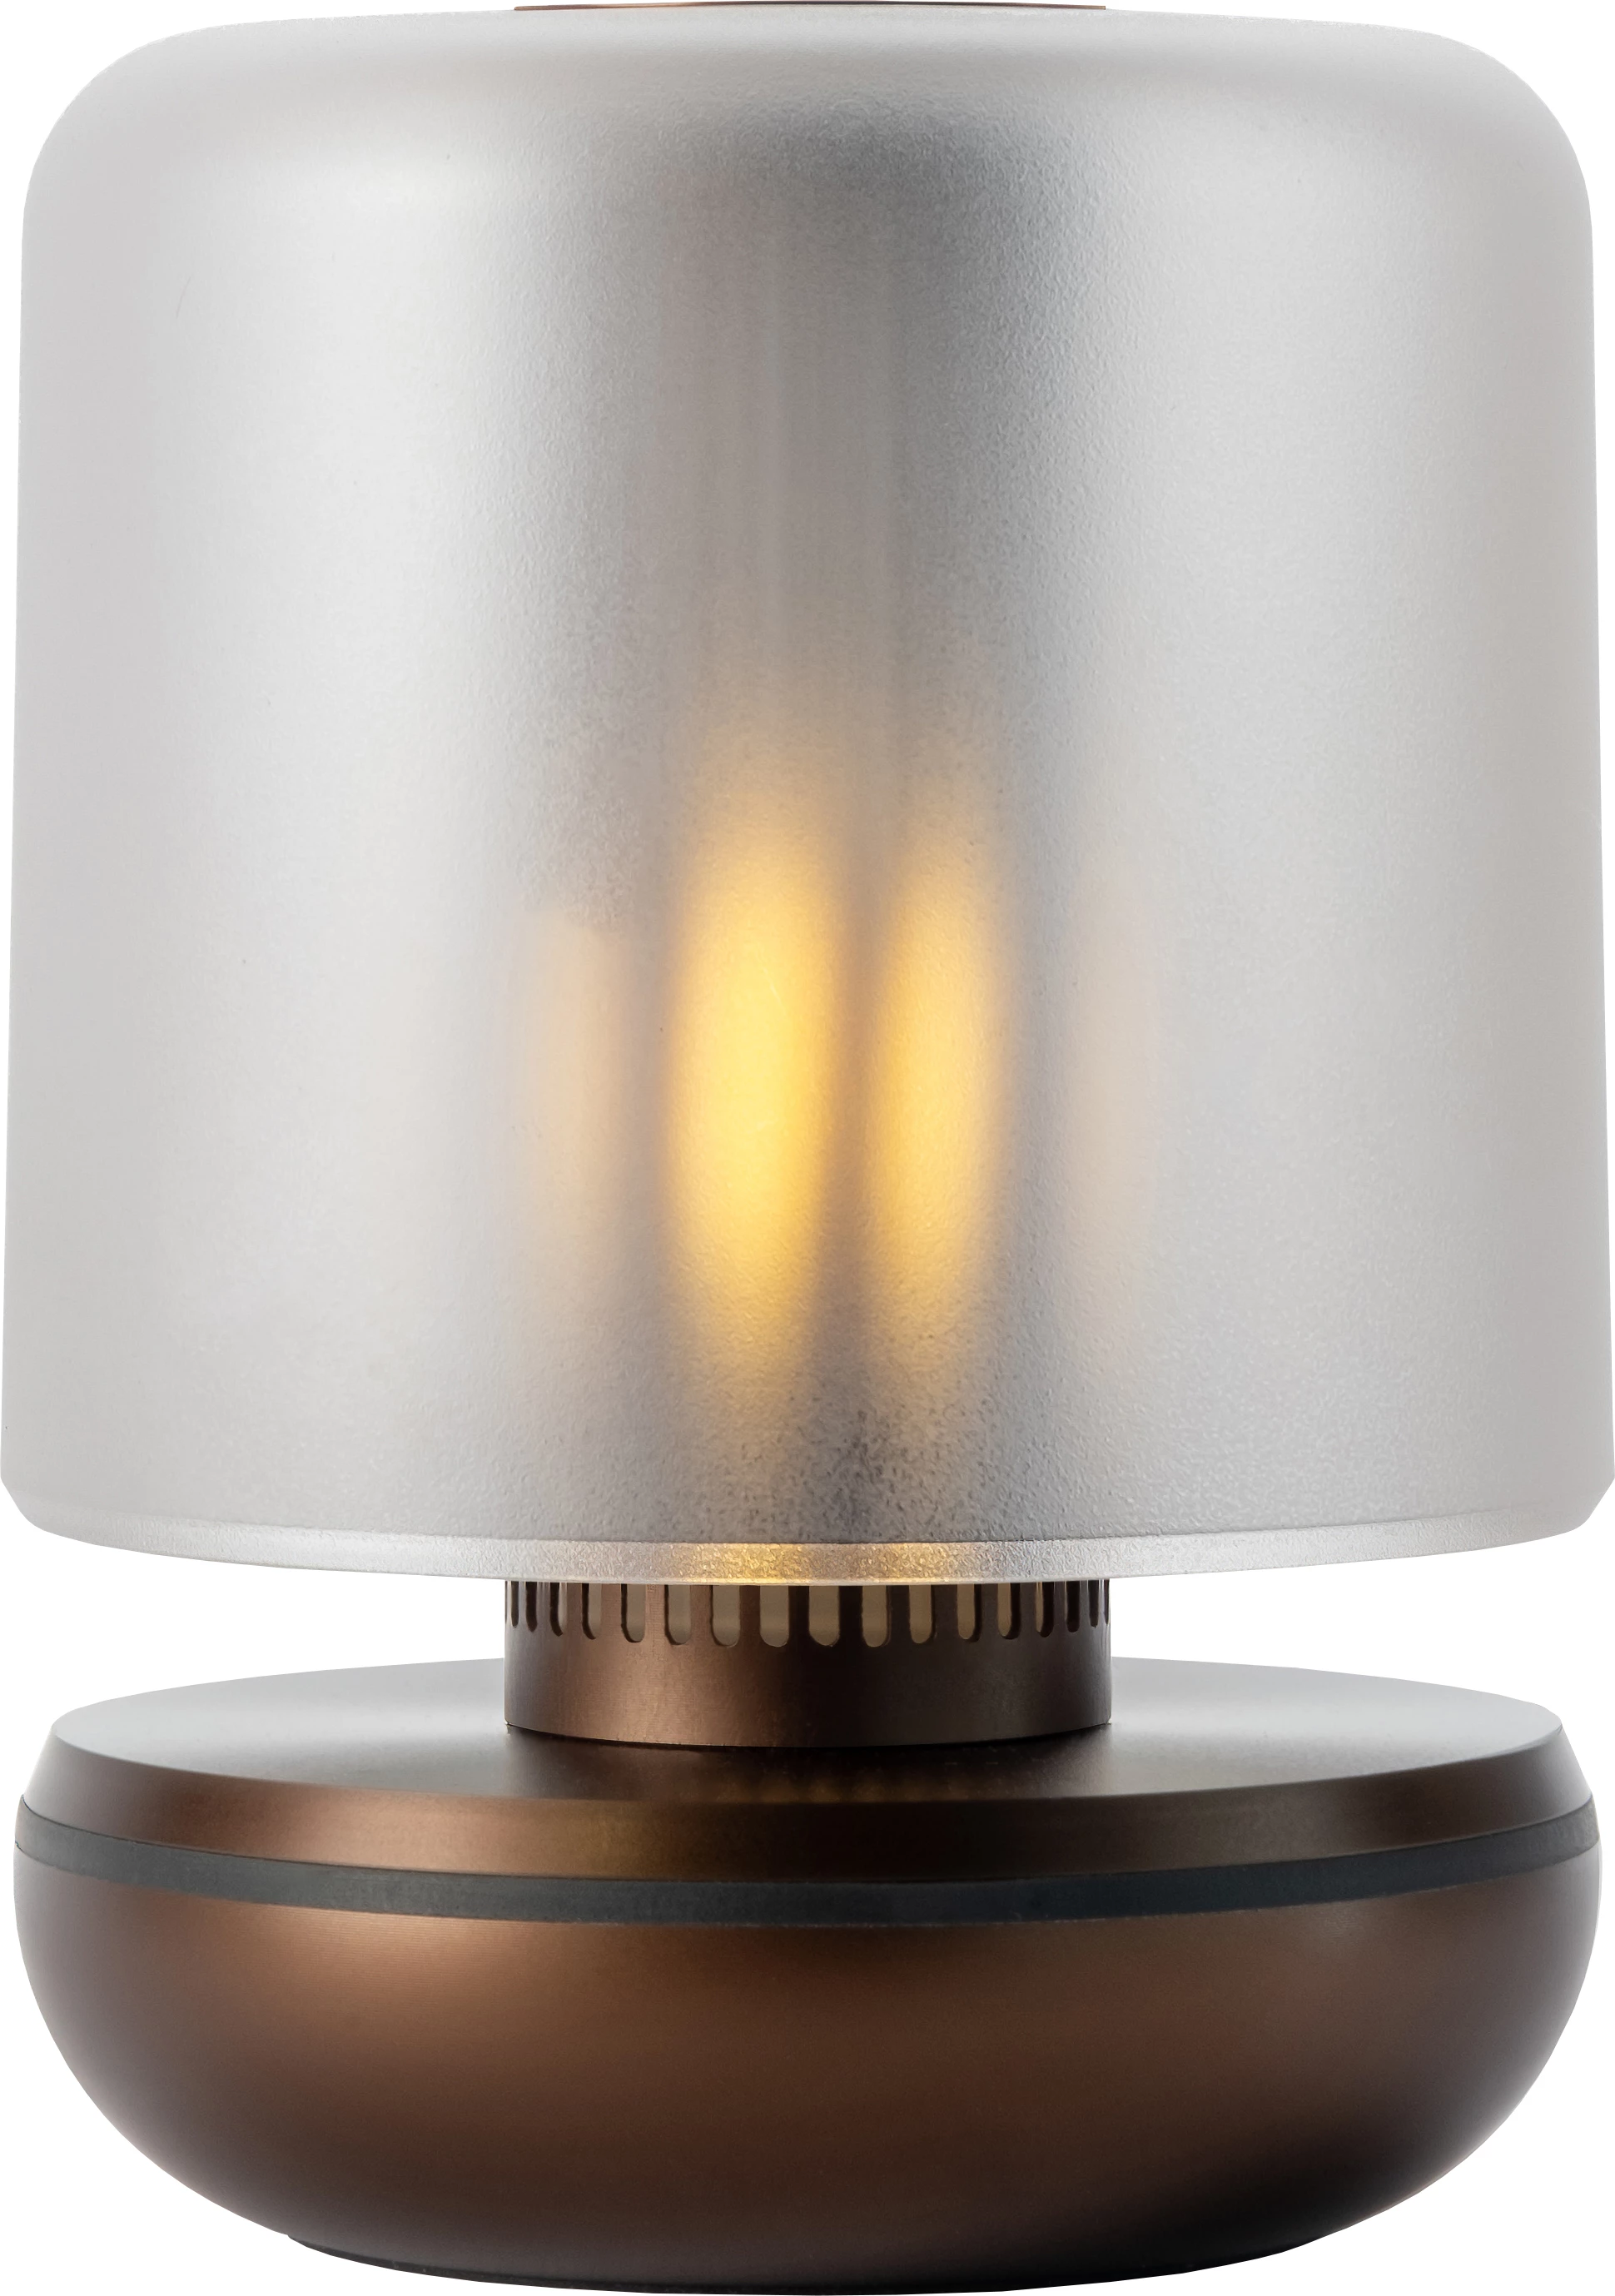 Humble Firefly lampe, bronze/frostet hvid, H11,8 cm